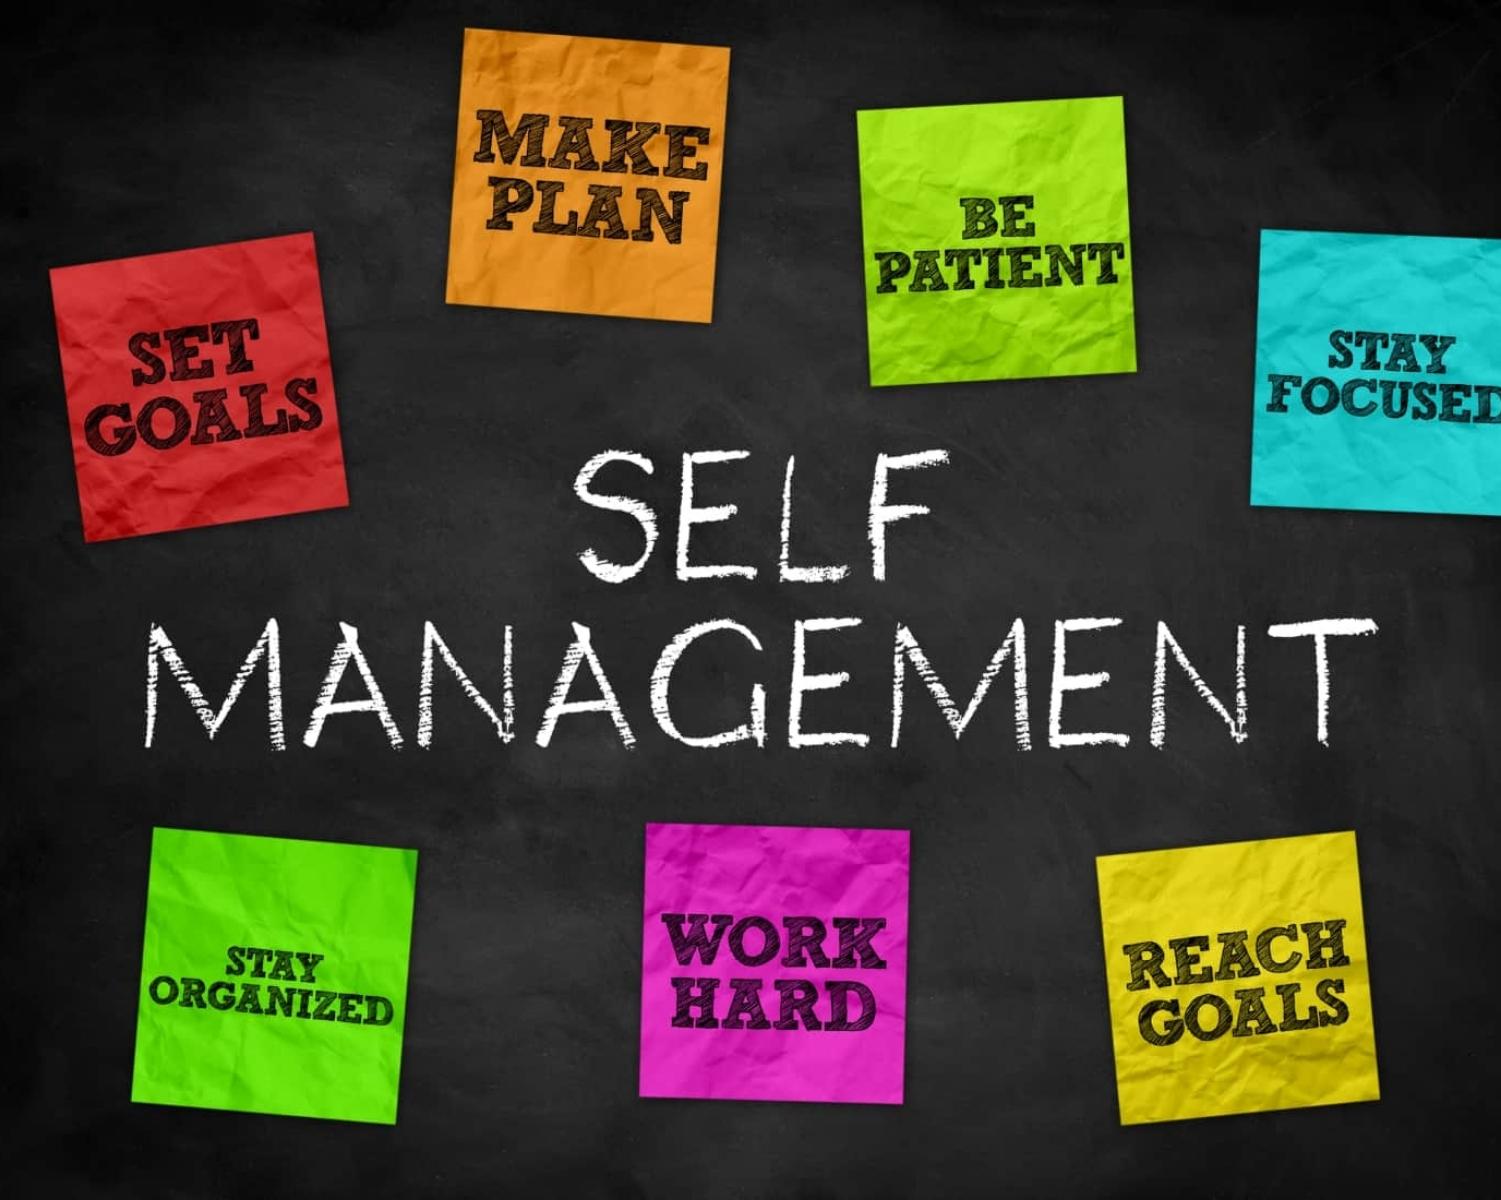 Effectively manage yourself